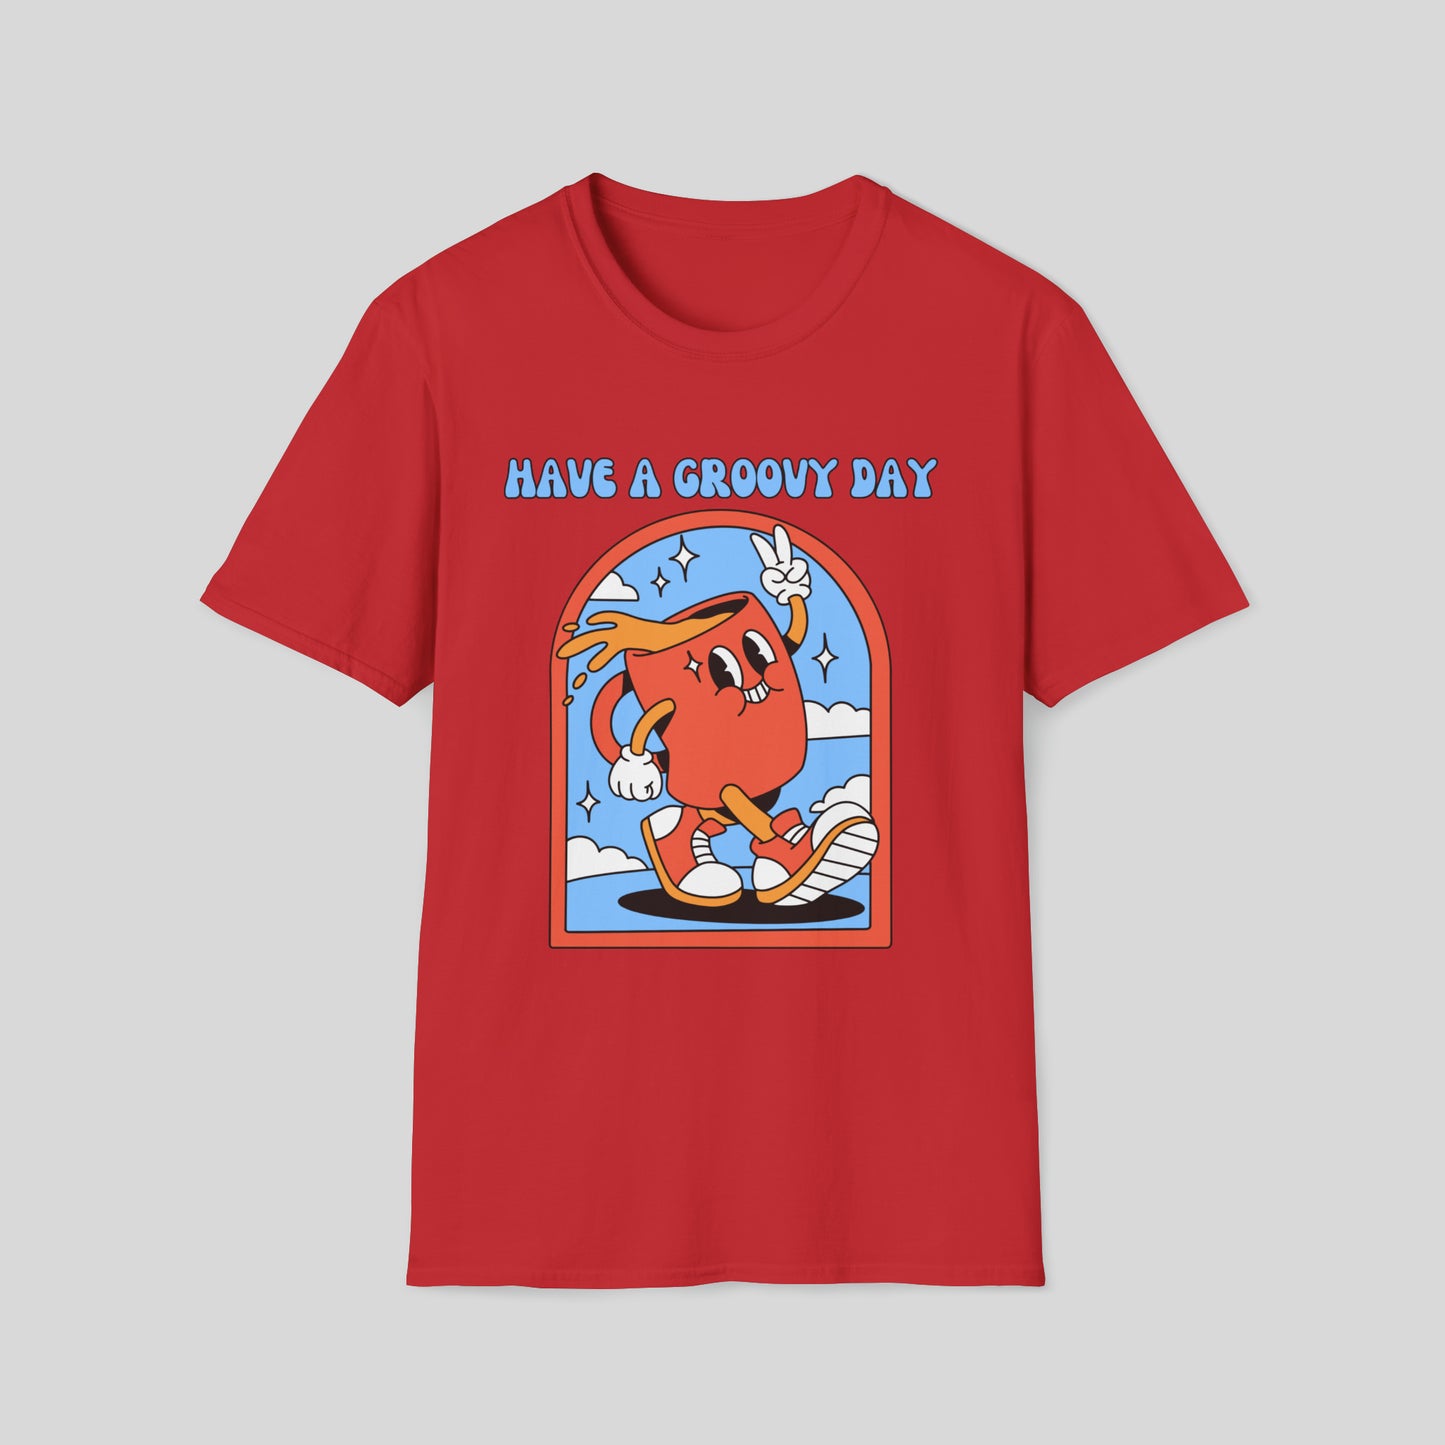 HAVE A GROOVY DAY T-SHIRT